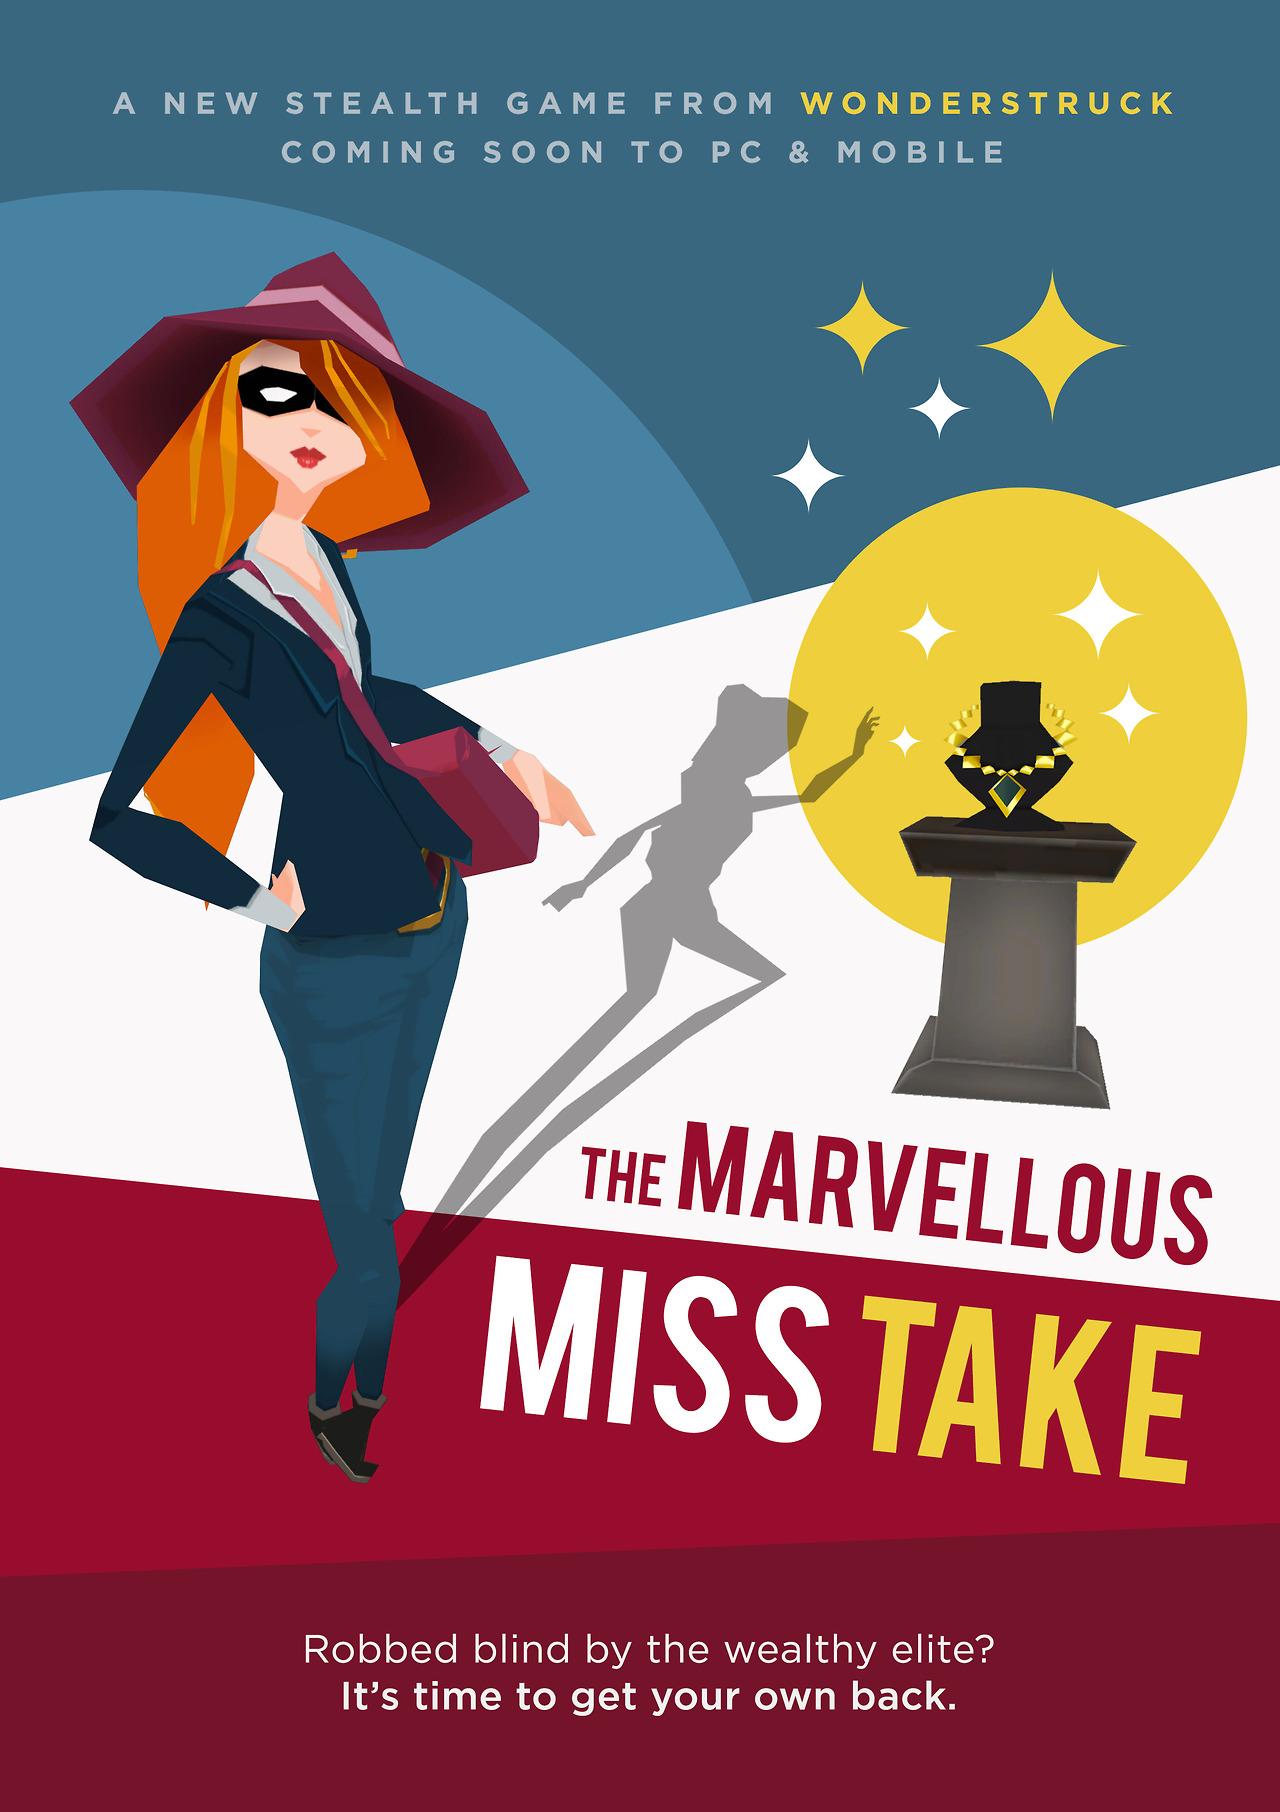 “The Marvelous Miss Take:” First Impressions - Stealth, Steal, Enjoy